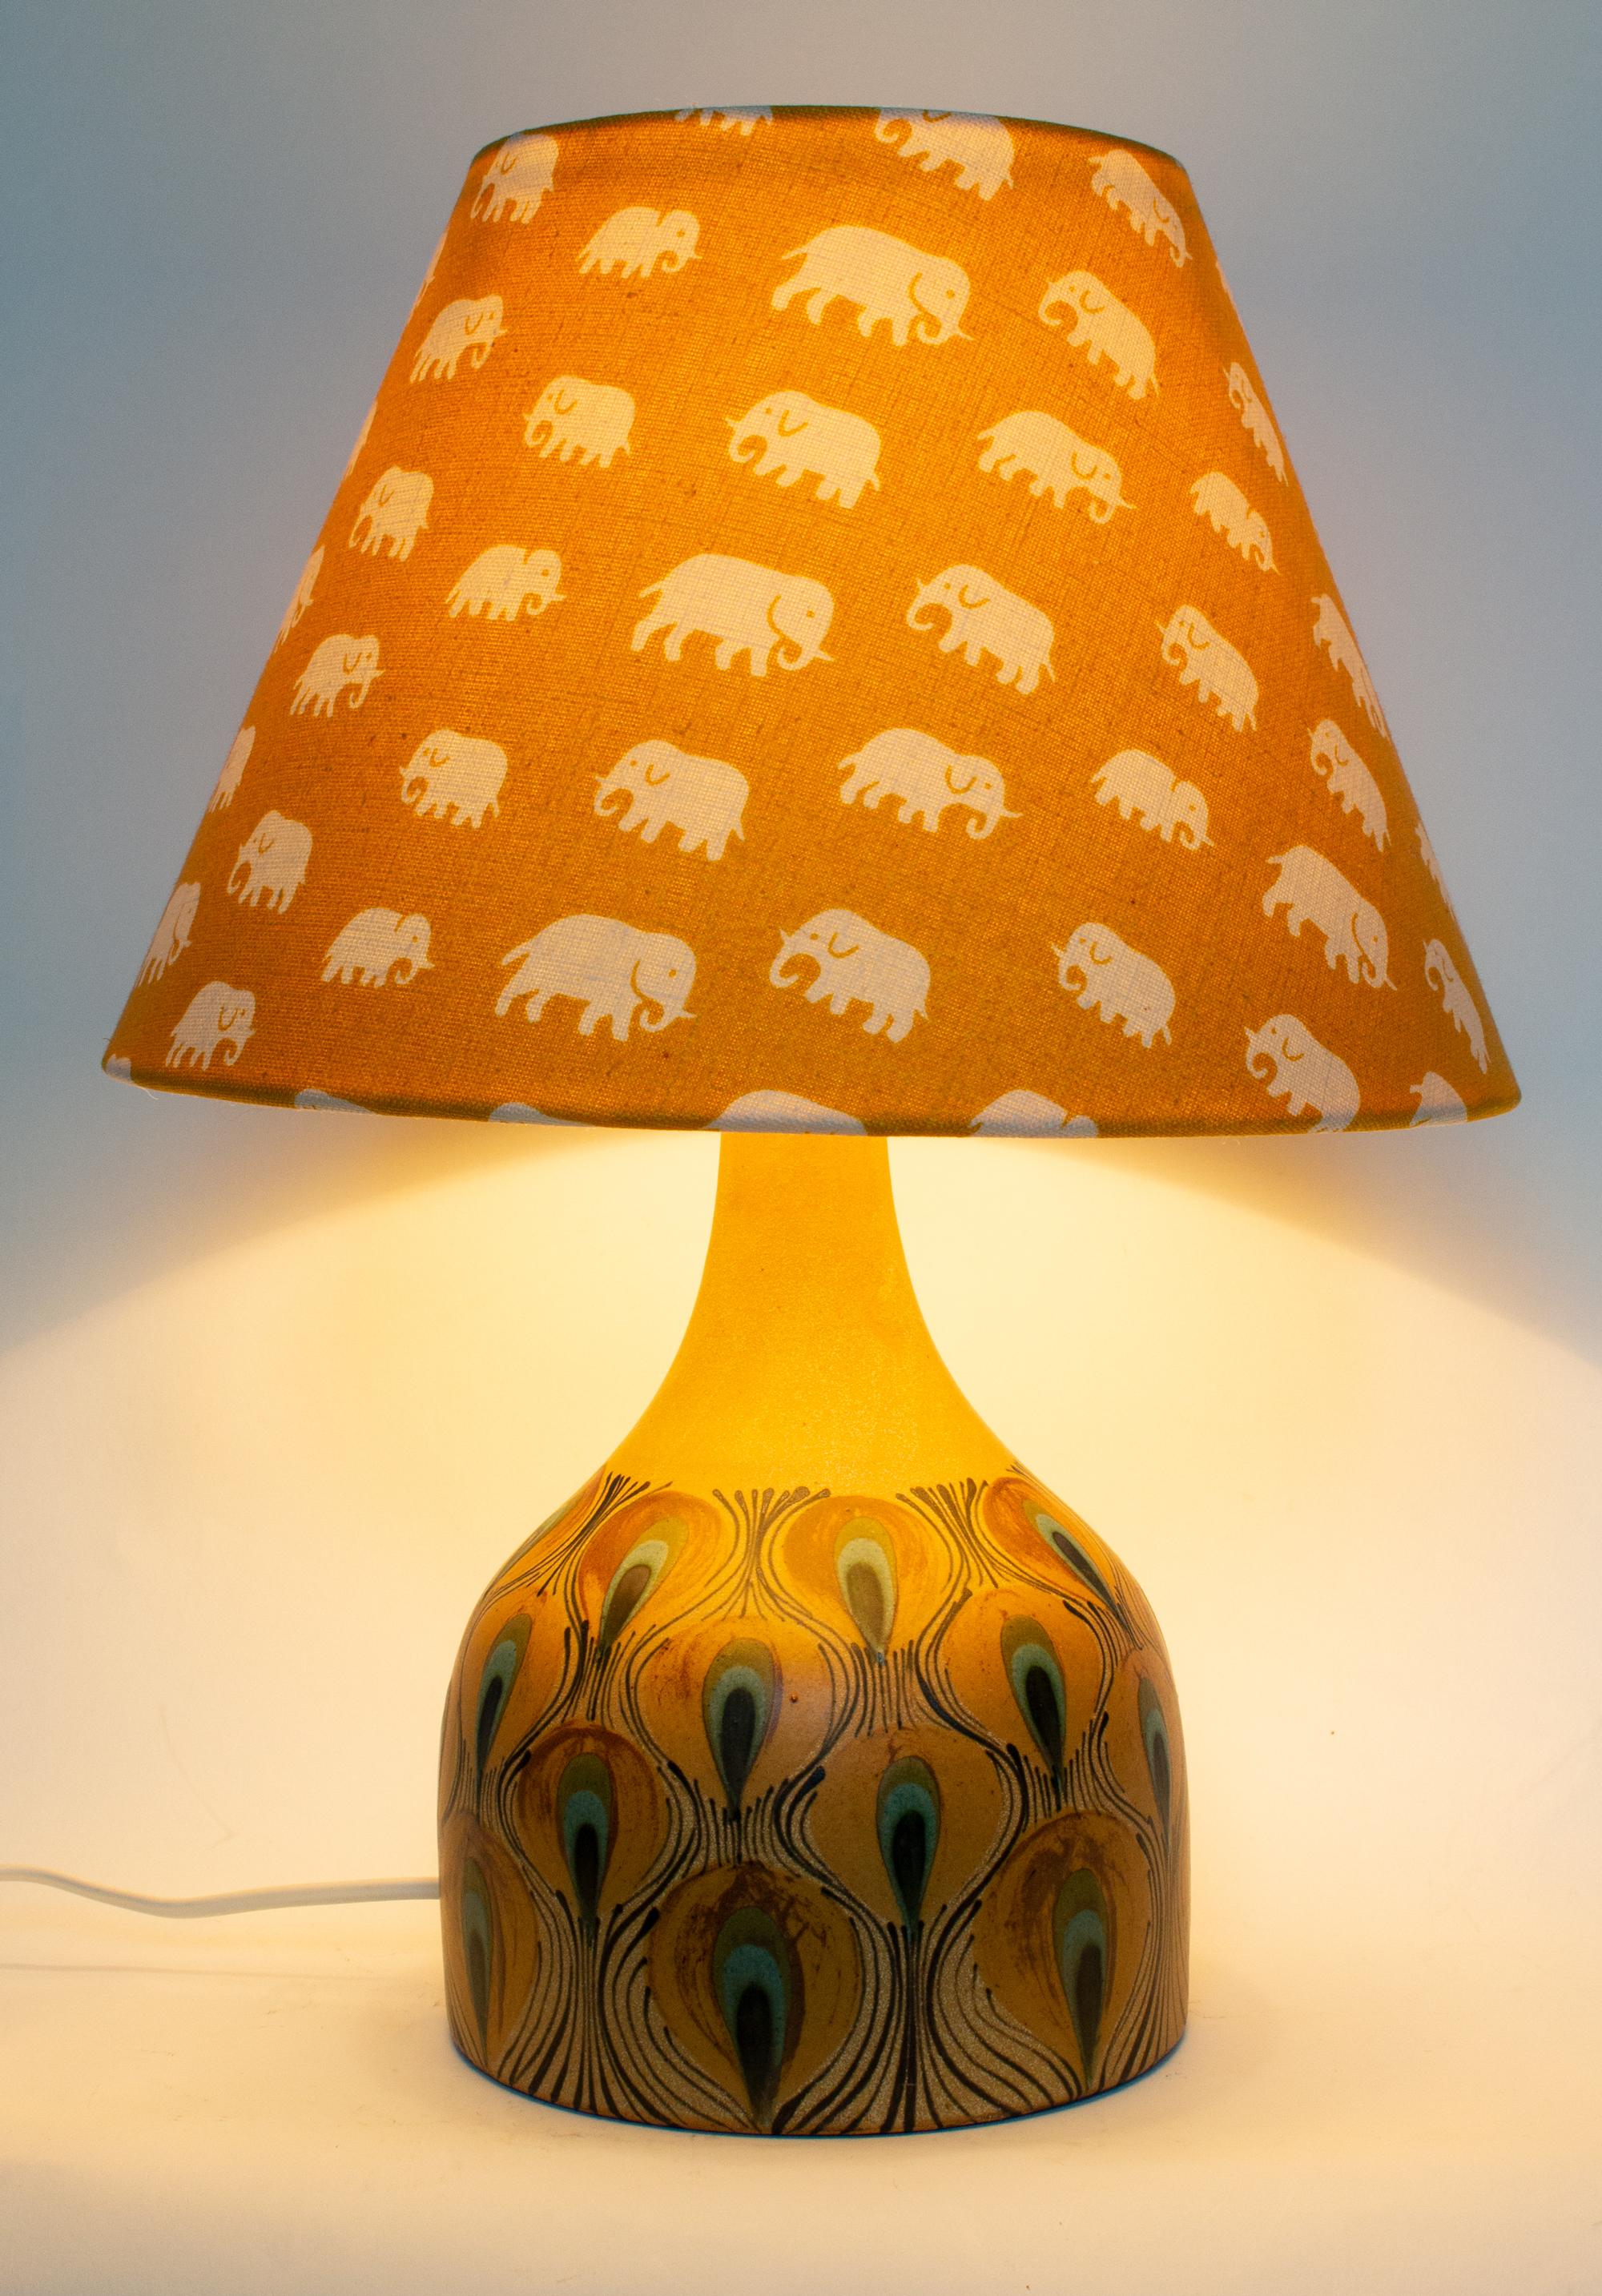 Mid-20th Century Mid-Century Modern Danish Table Lamp with Peacock Pattern by Margrethe Dybdahl For Sale